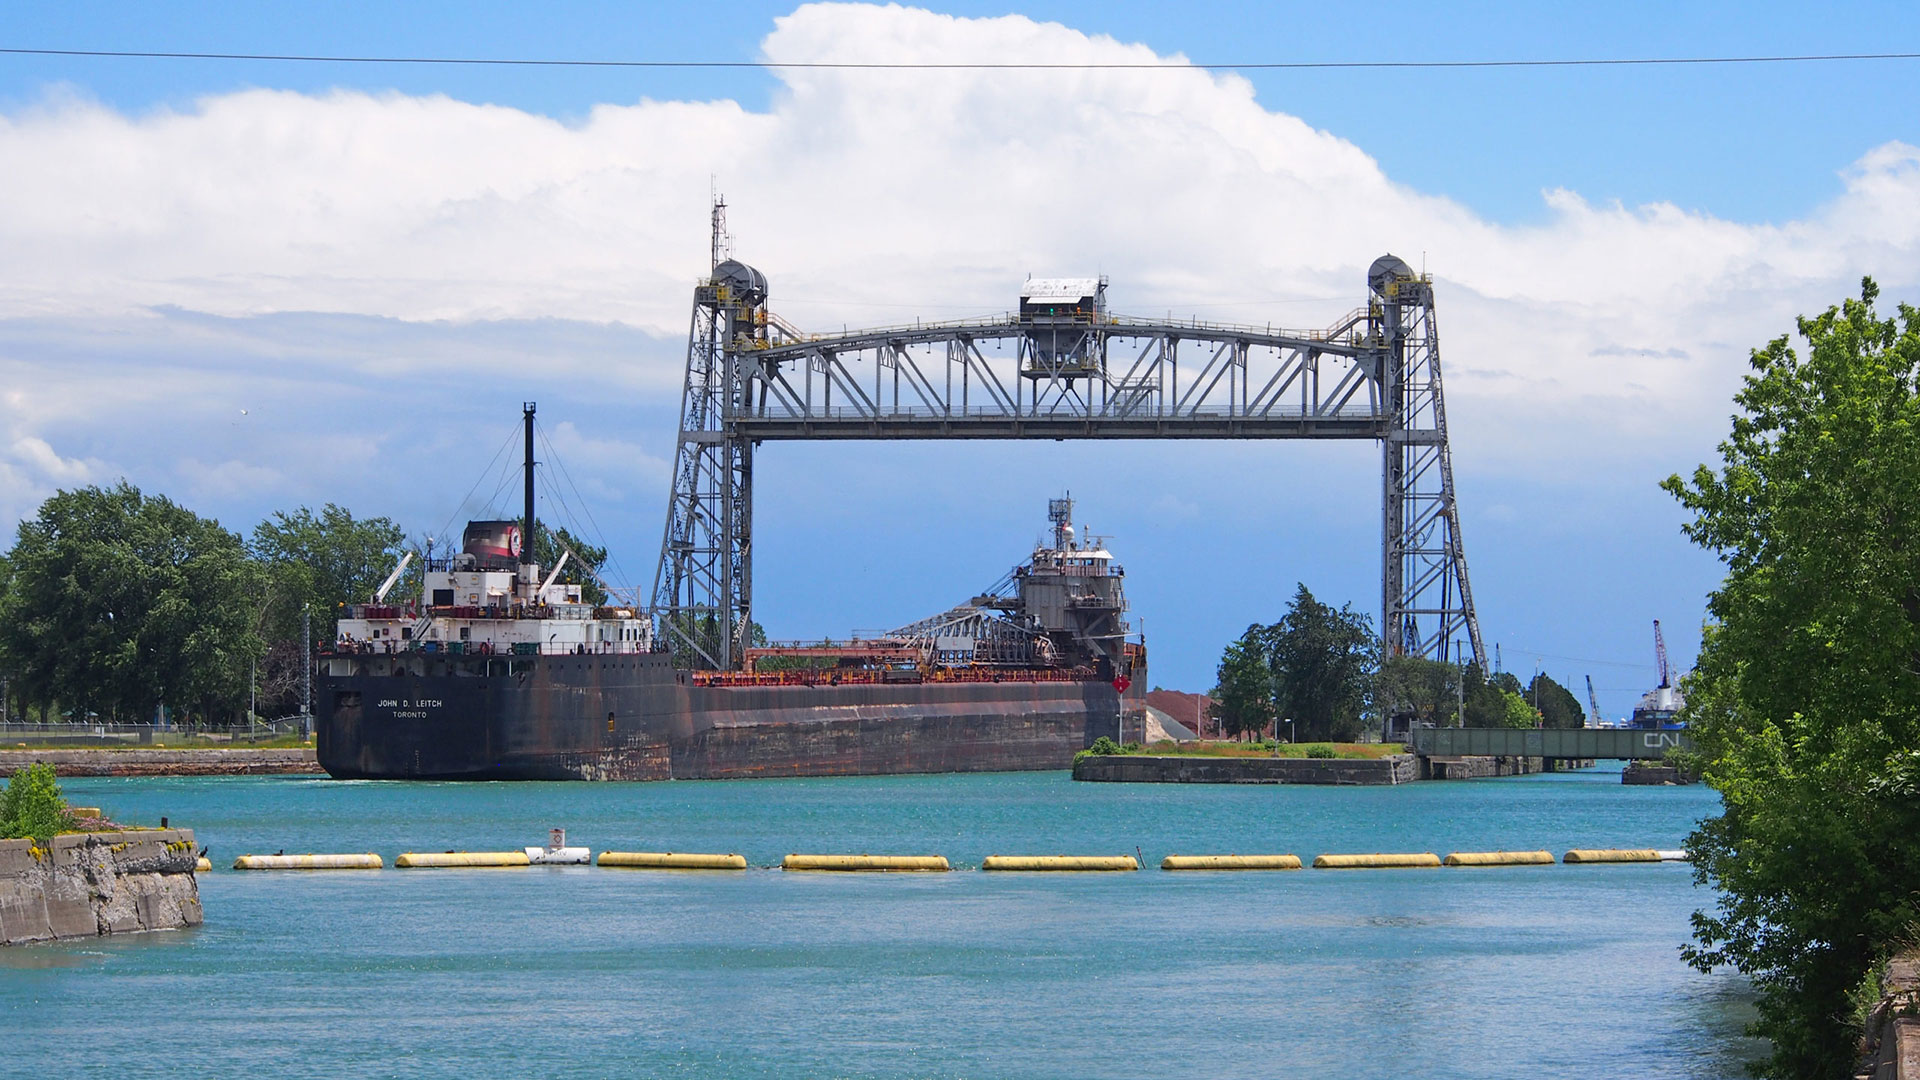 Port Colborne canal bridge is raised, with a ship passing through